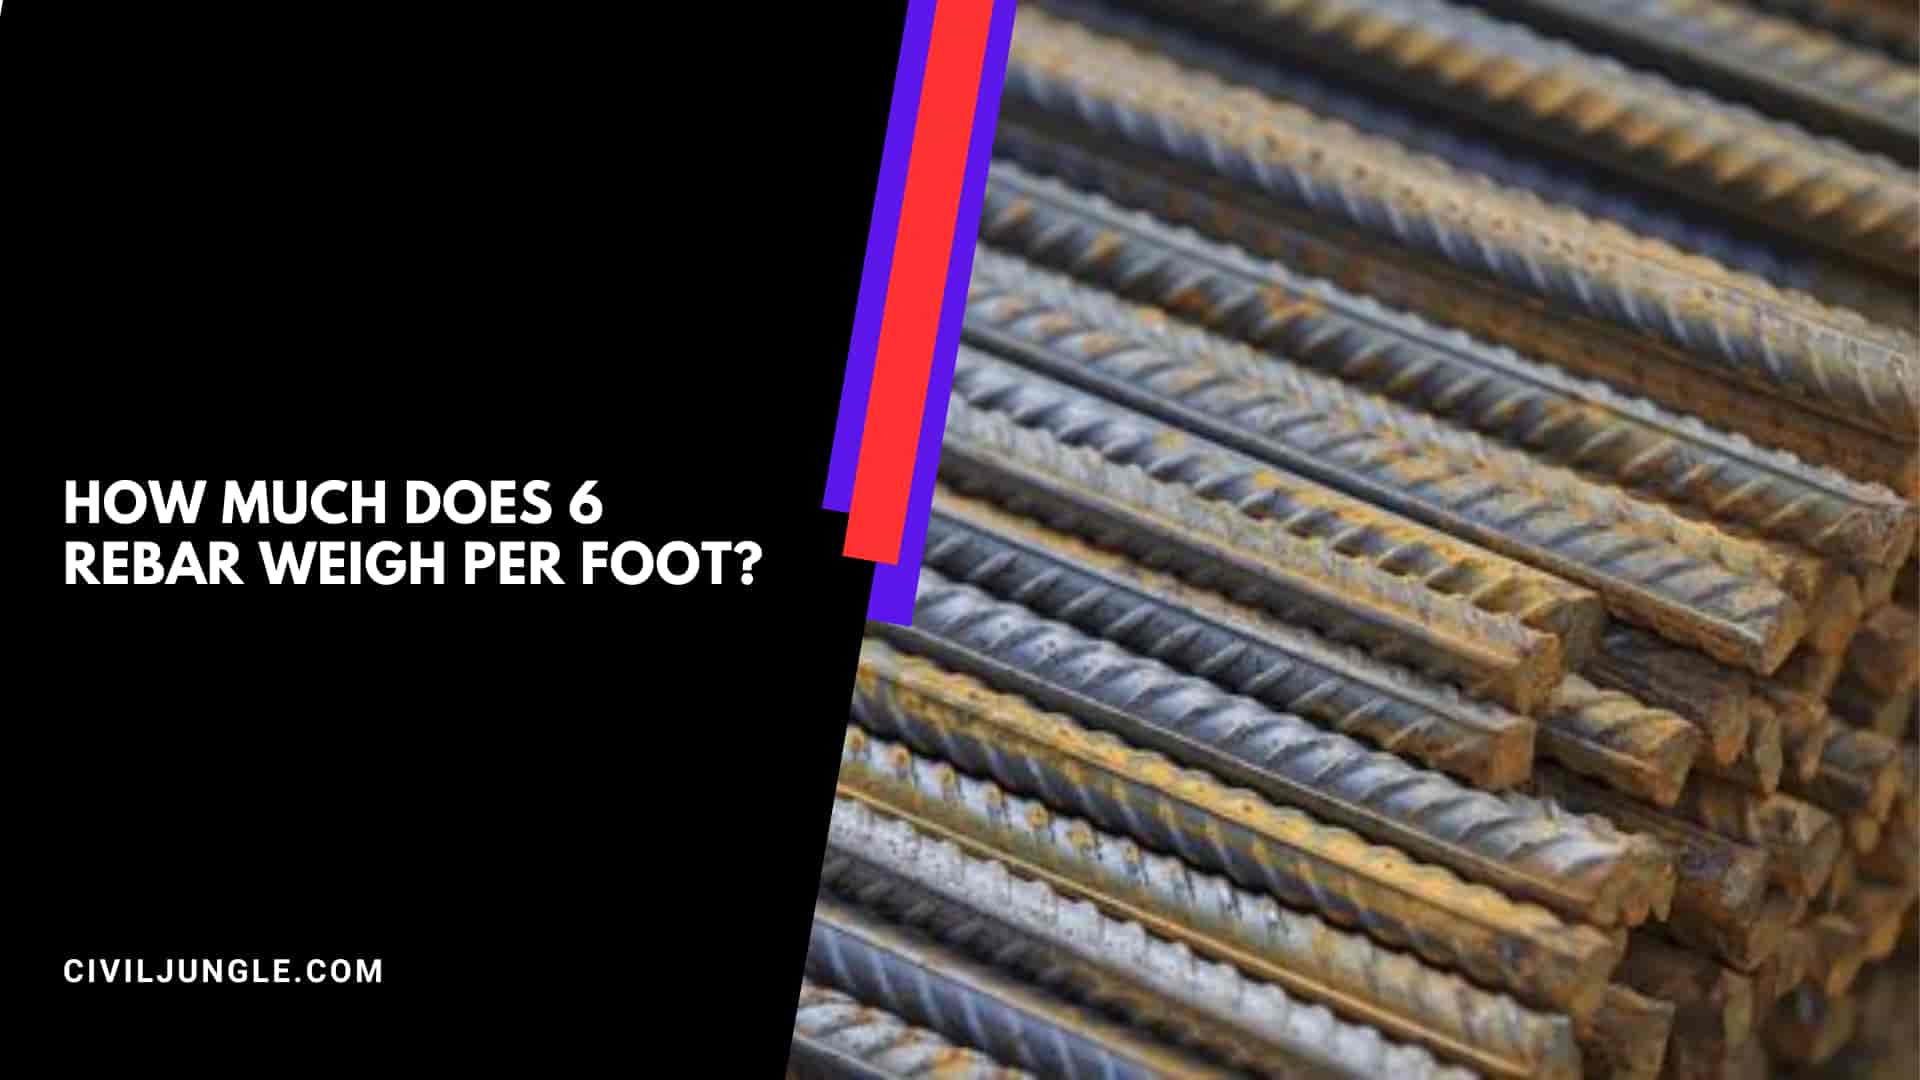 How Much Does 6 Rebar Weigh Per Foot?